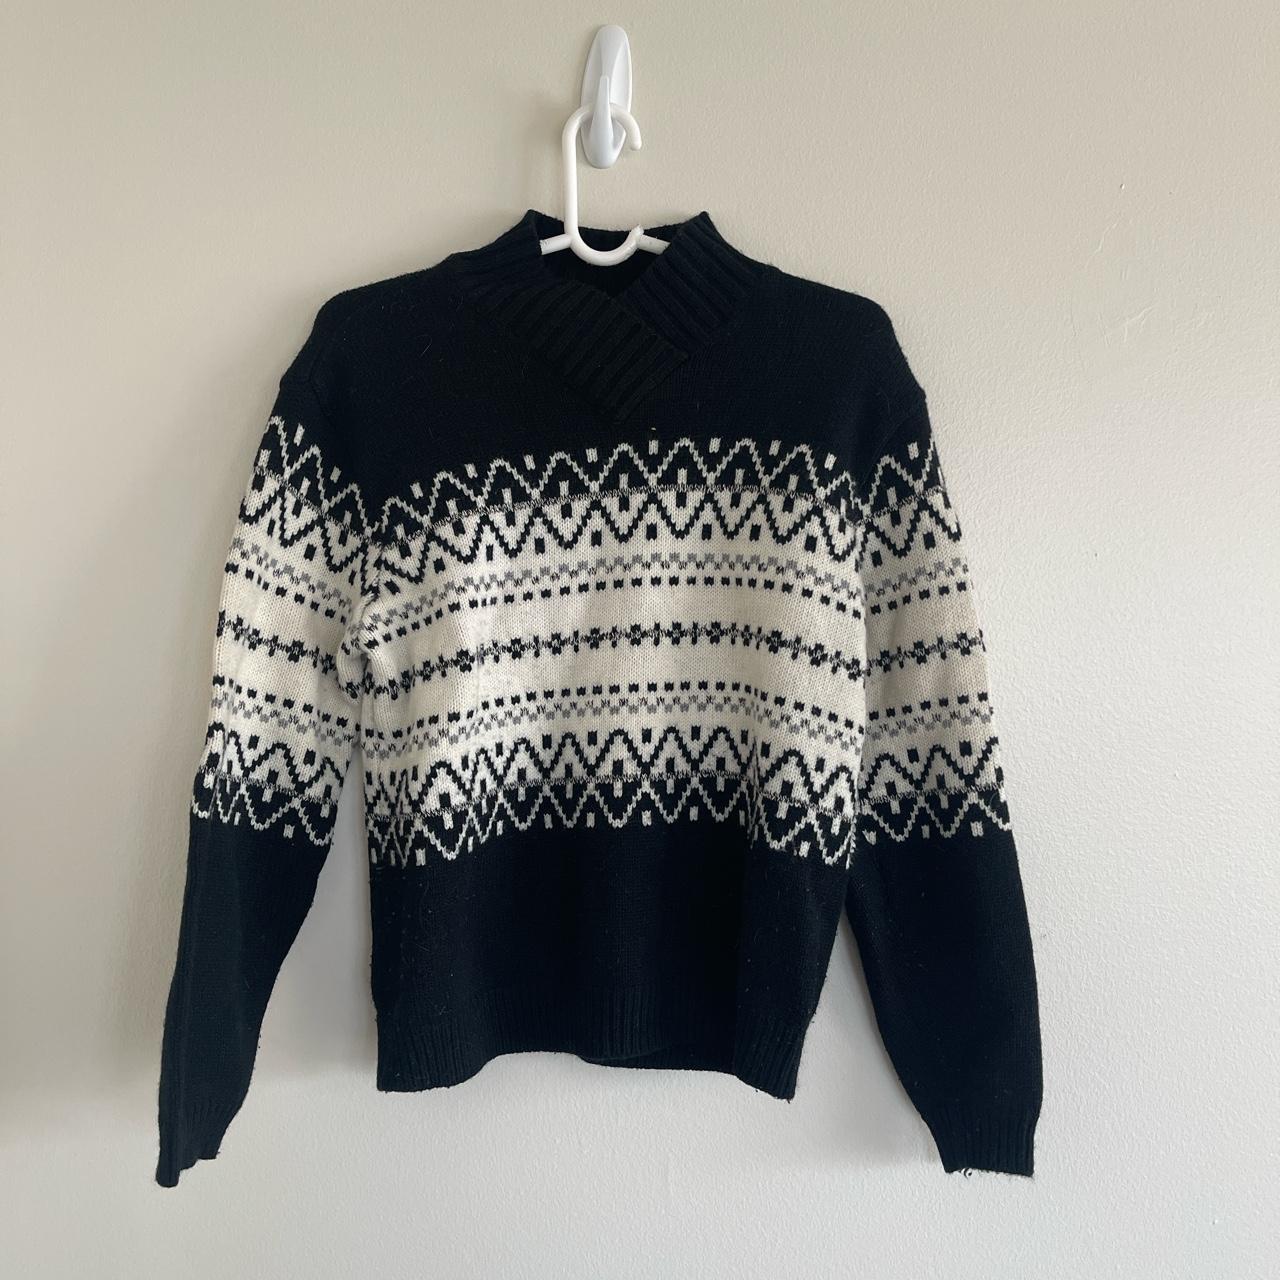 Vintage 90s style cross neck black and white wool... - Depop